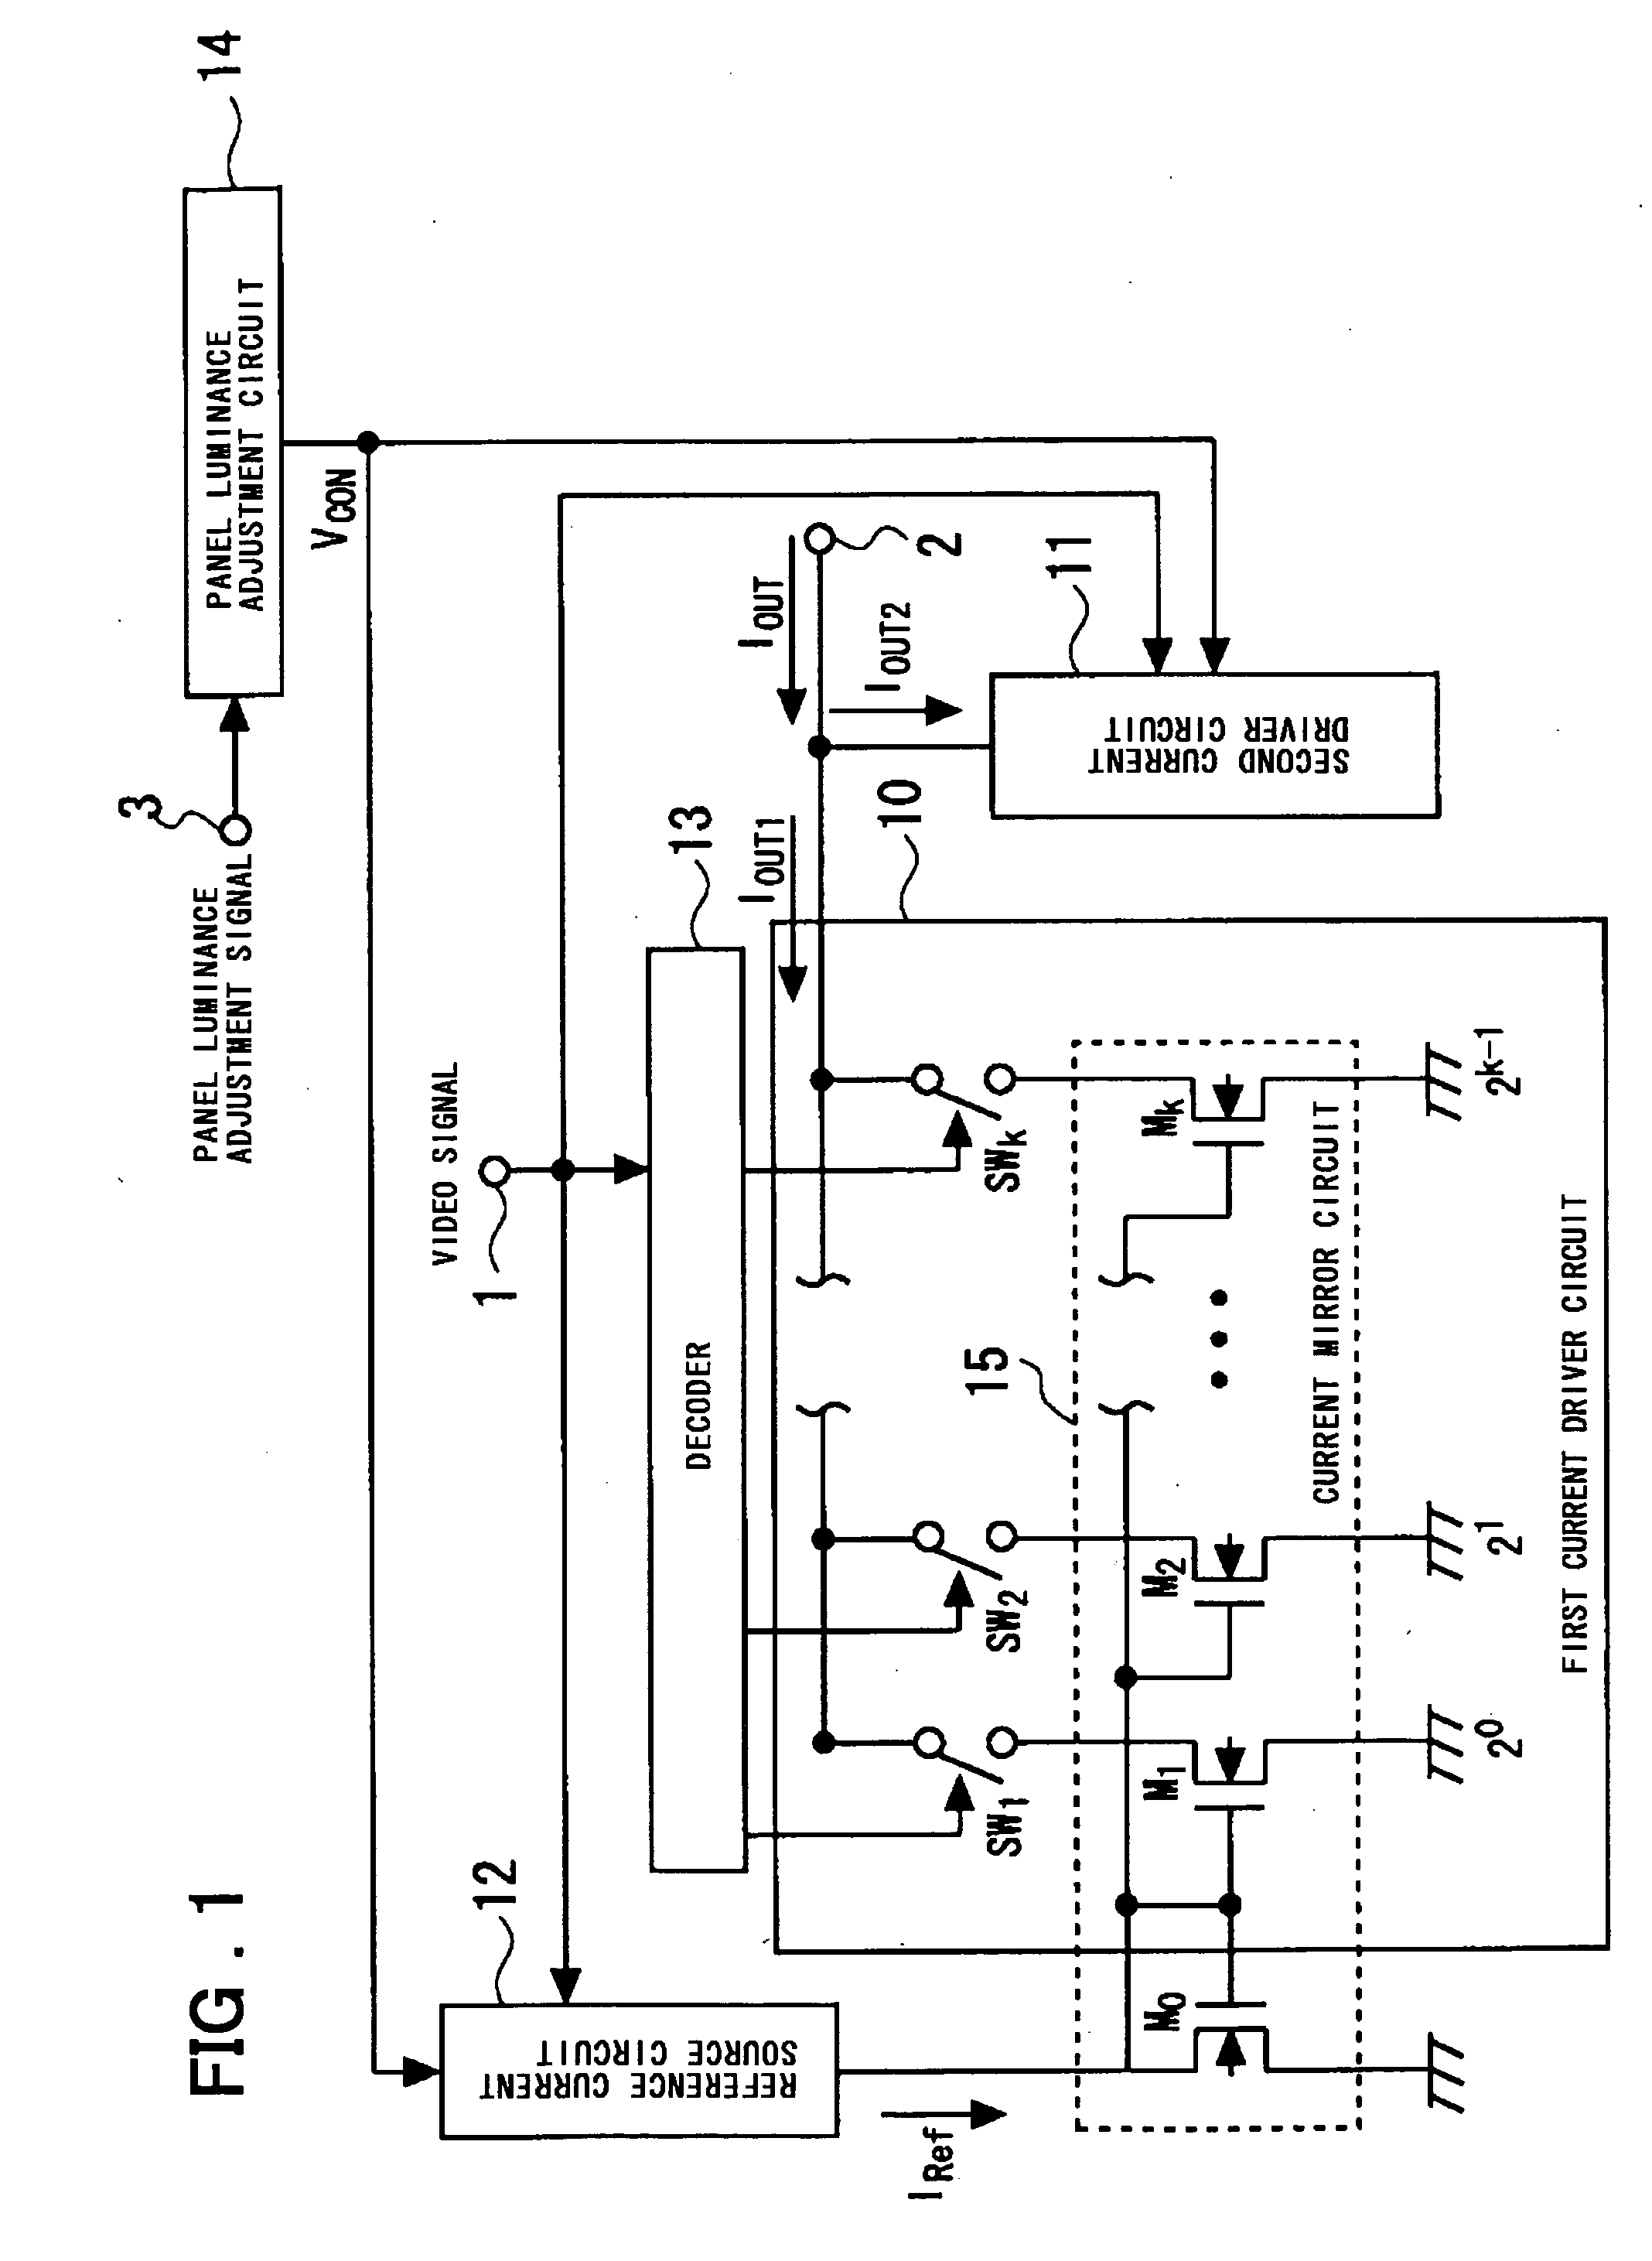 Driver circuit for light emitting element